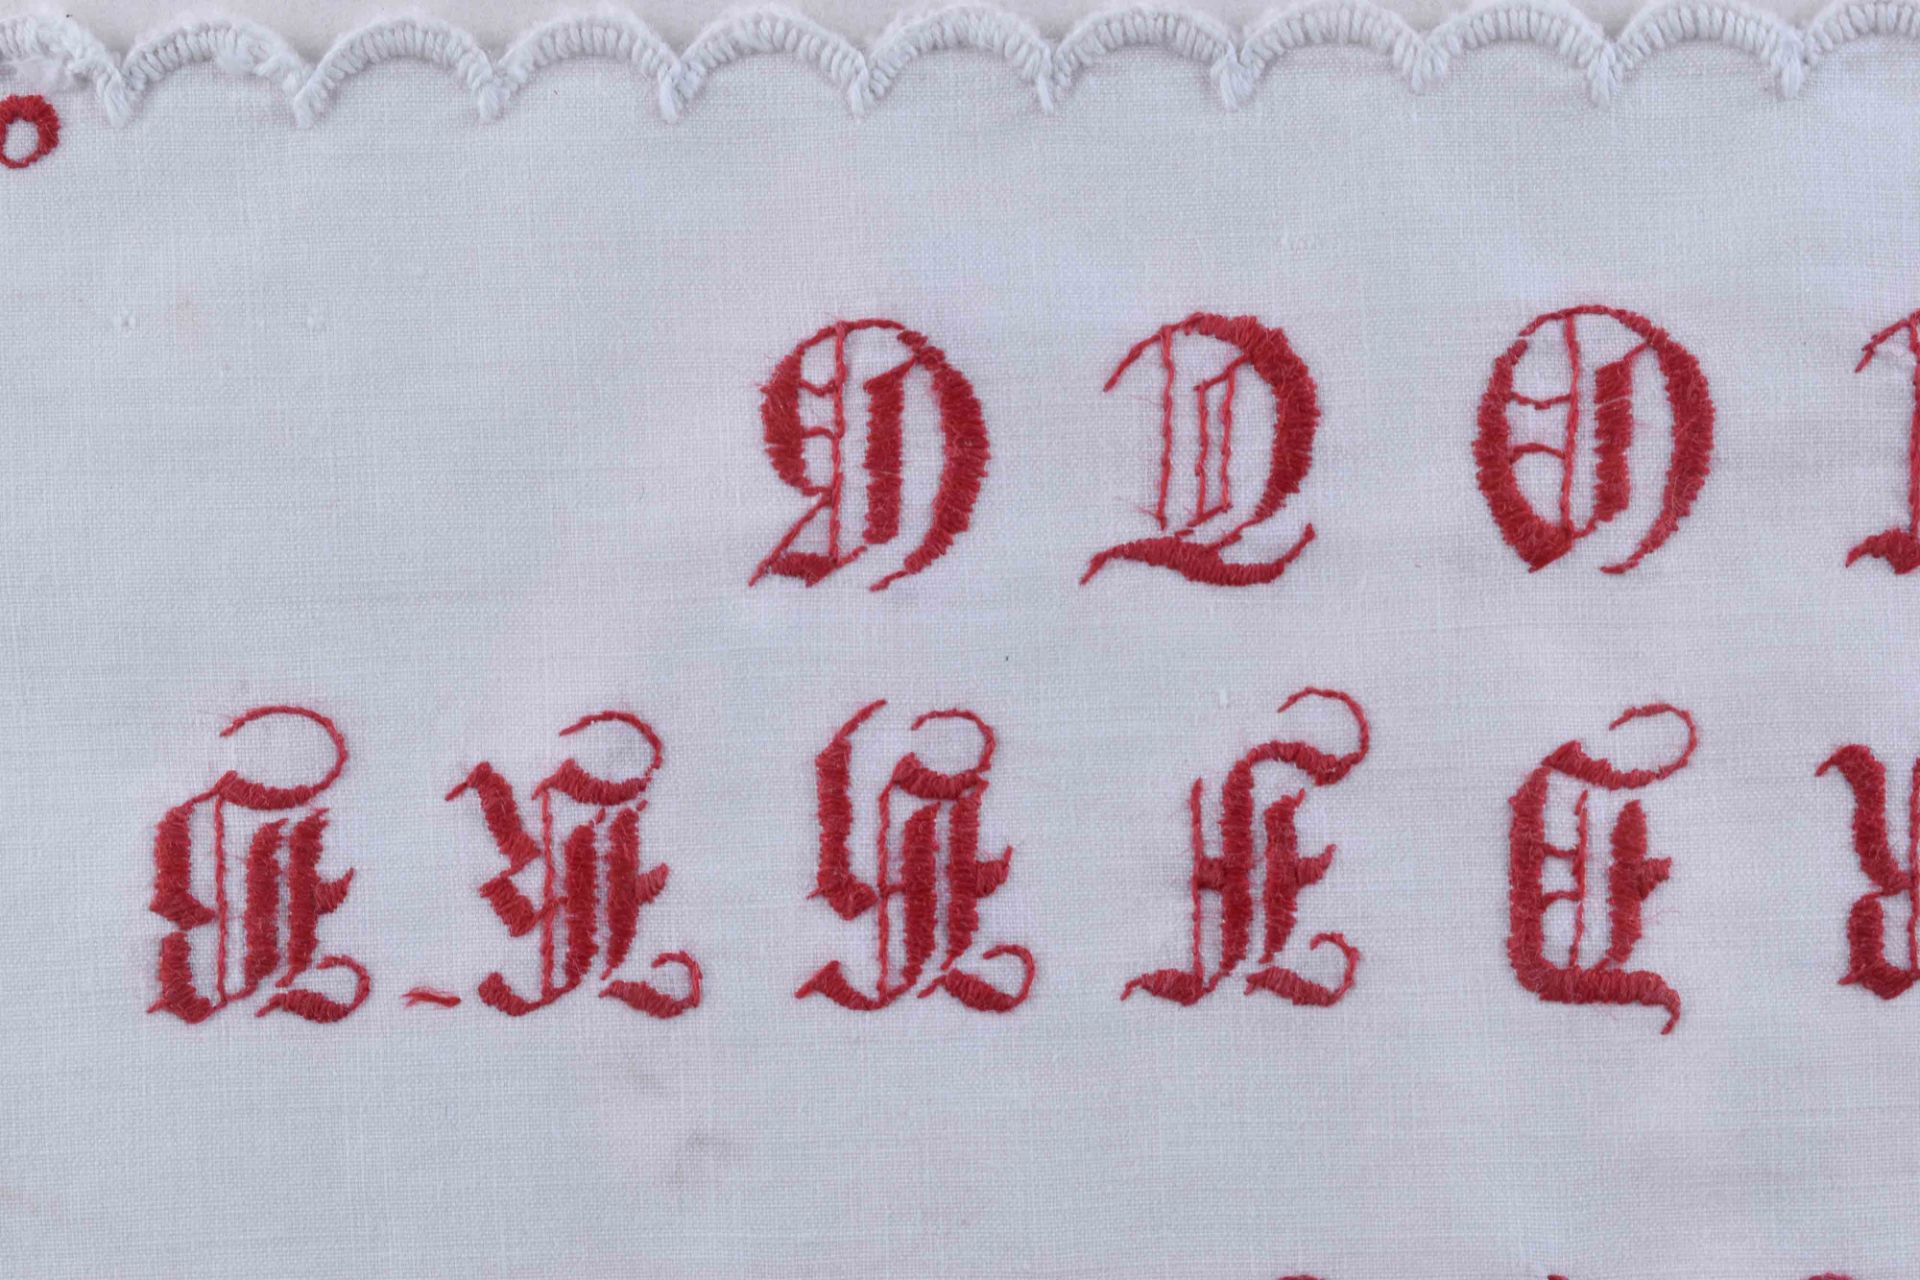 2 alphabetic embroideries from the 20svisible dimensions: 16.5 cm x 22.5 cm, visible dimensions 28 - Bild 4 aus 7